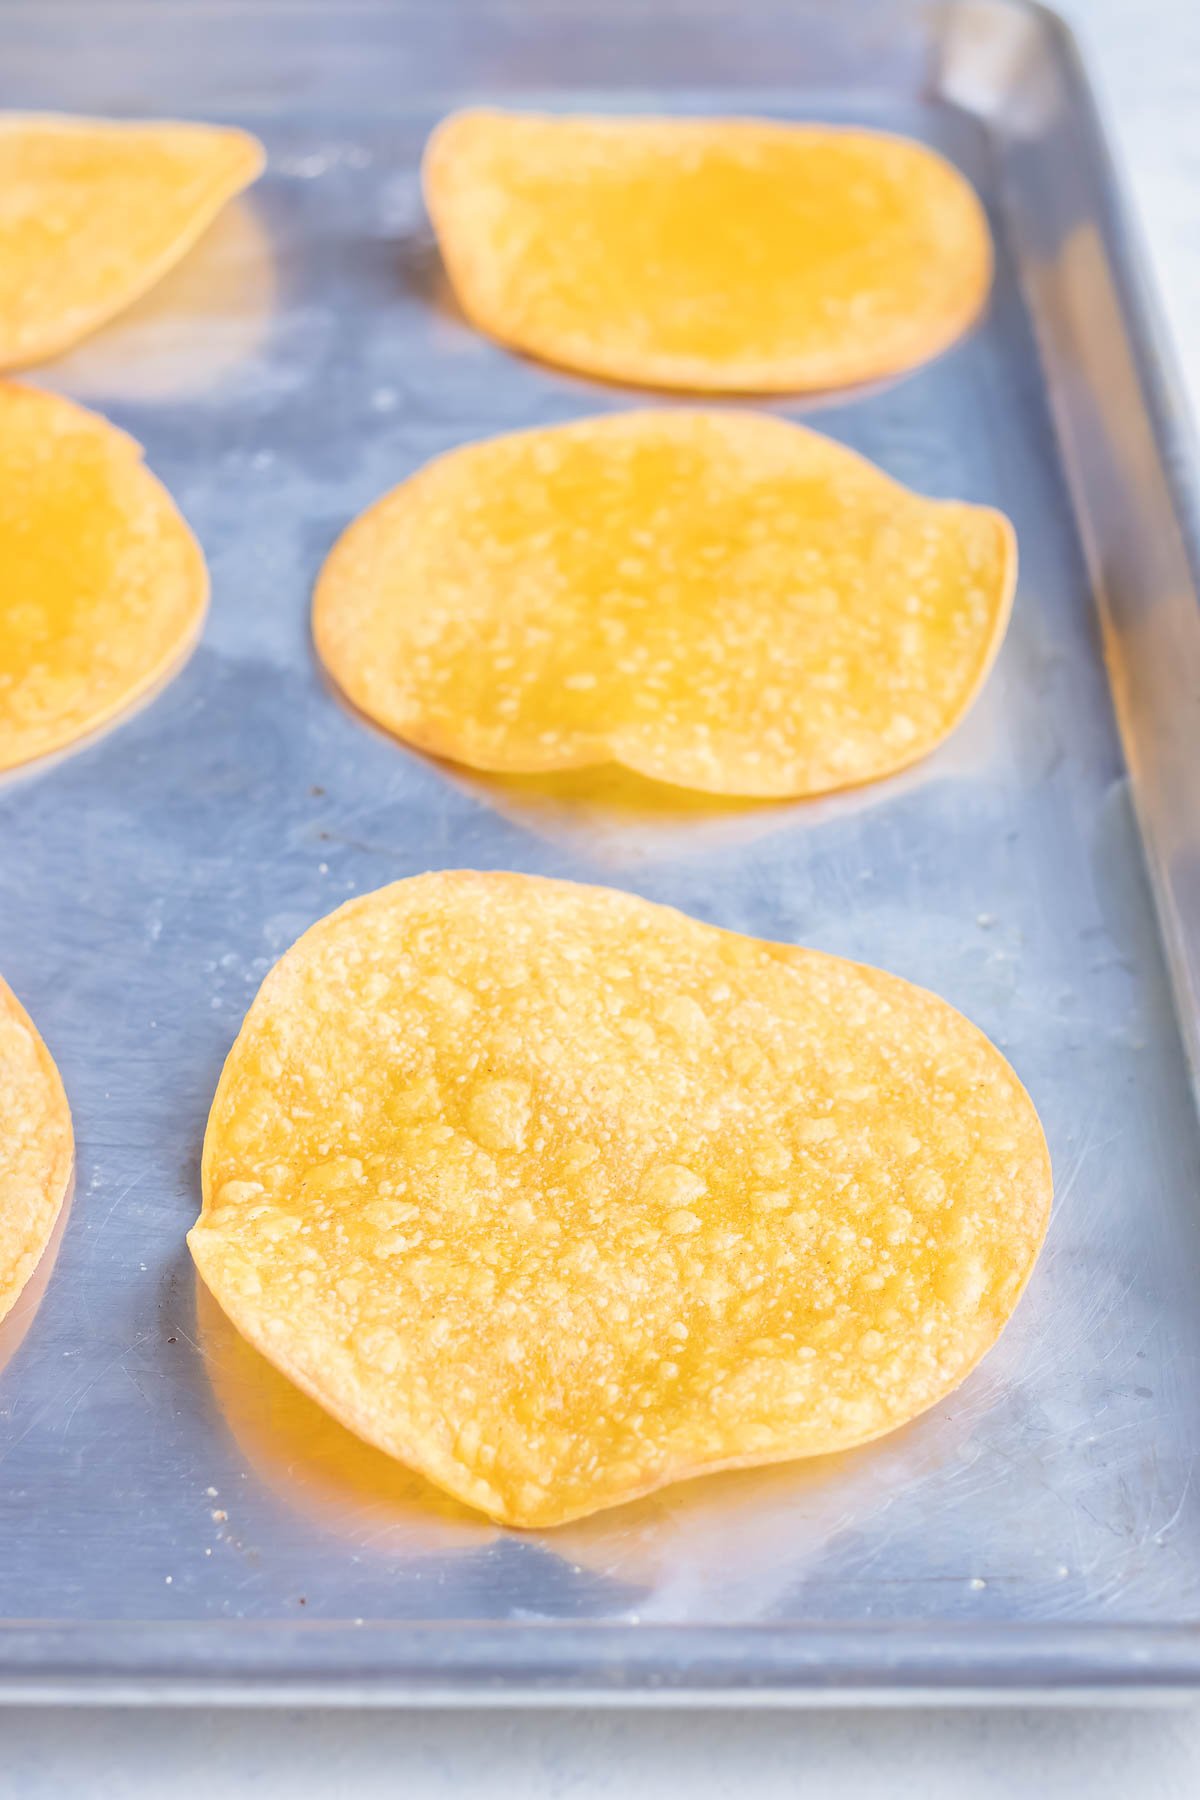 Corn tortillas are baked in the oven.